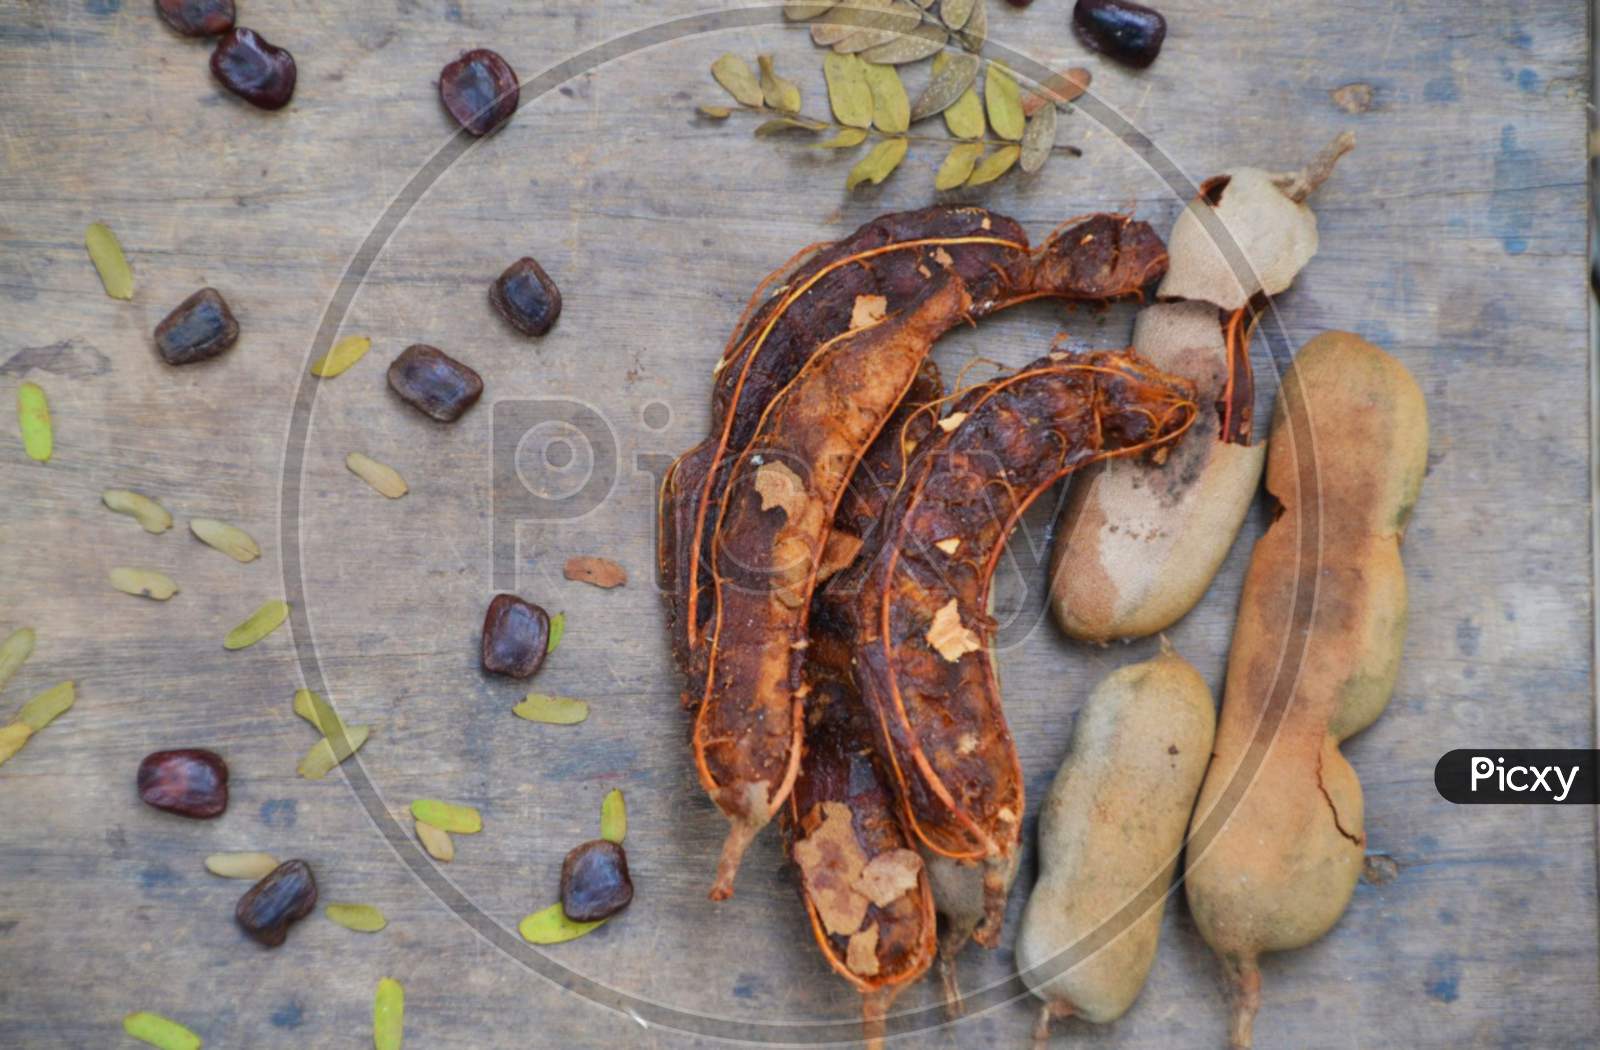 Sour tamarind and its seeds